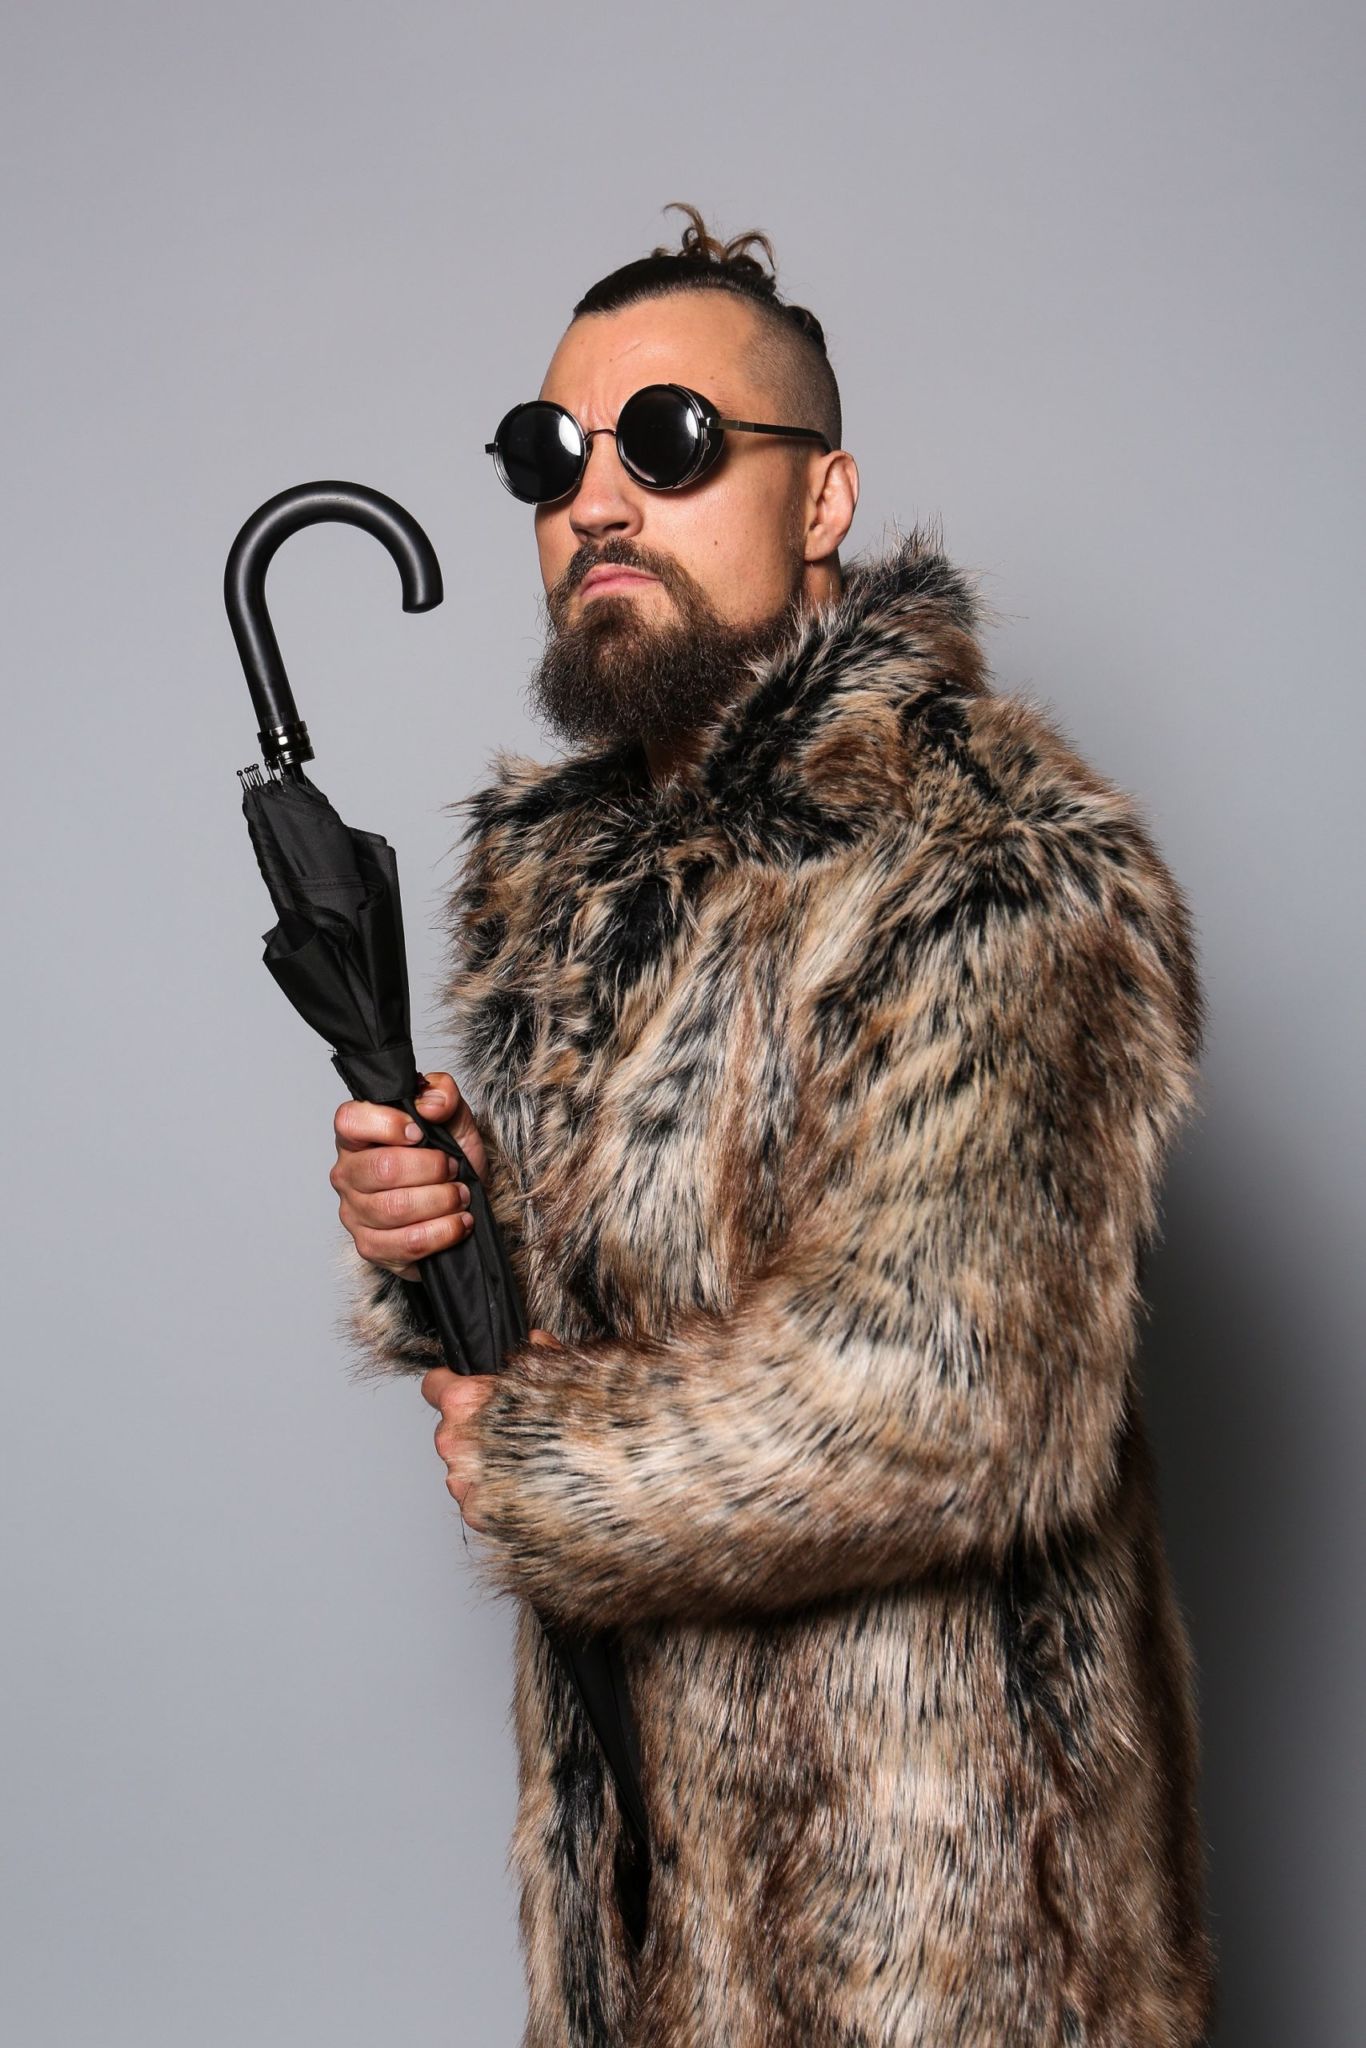 Marty Scurll on How Ring of Honor Is Taking Care of Talent Amid Pandemic